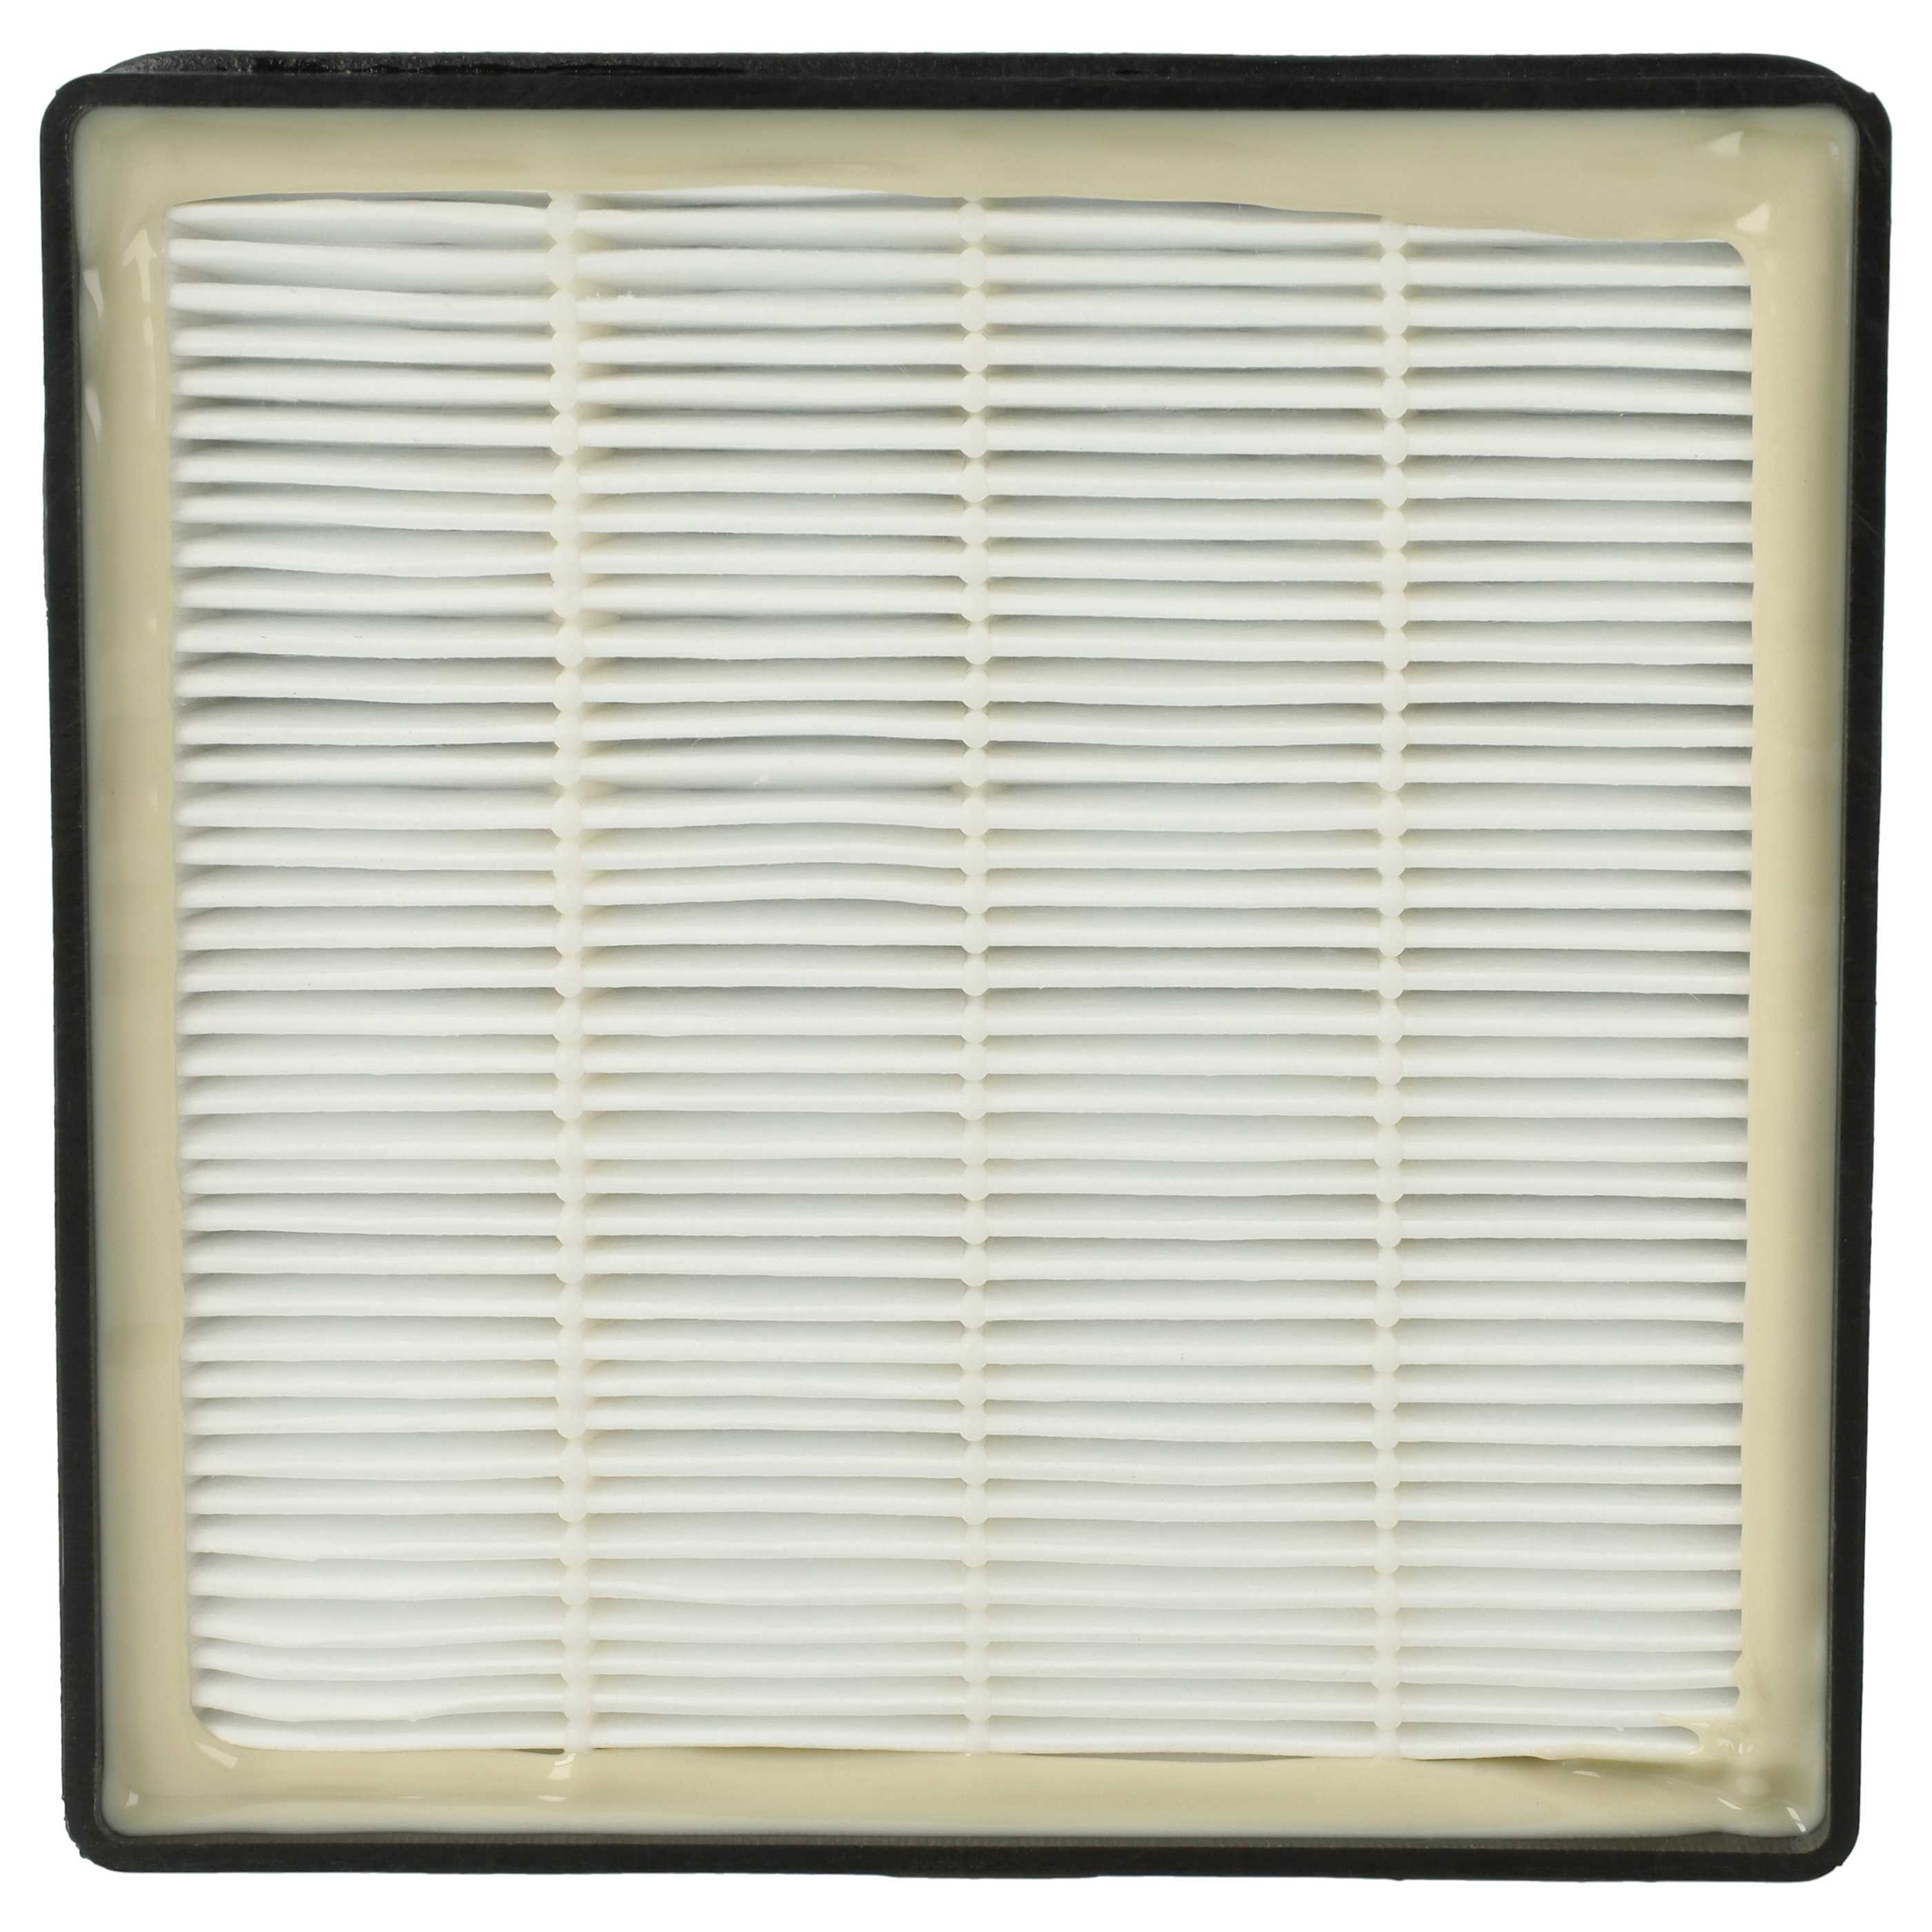 1x Filter replaces Rowenta 2210016094, RS-RT3186 for Rowenta Vacuum Cleaner